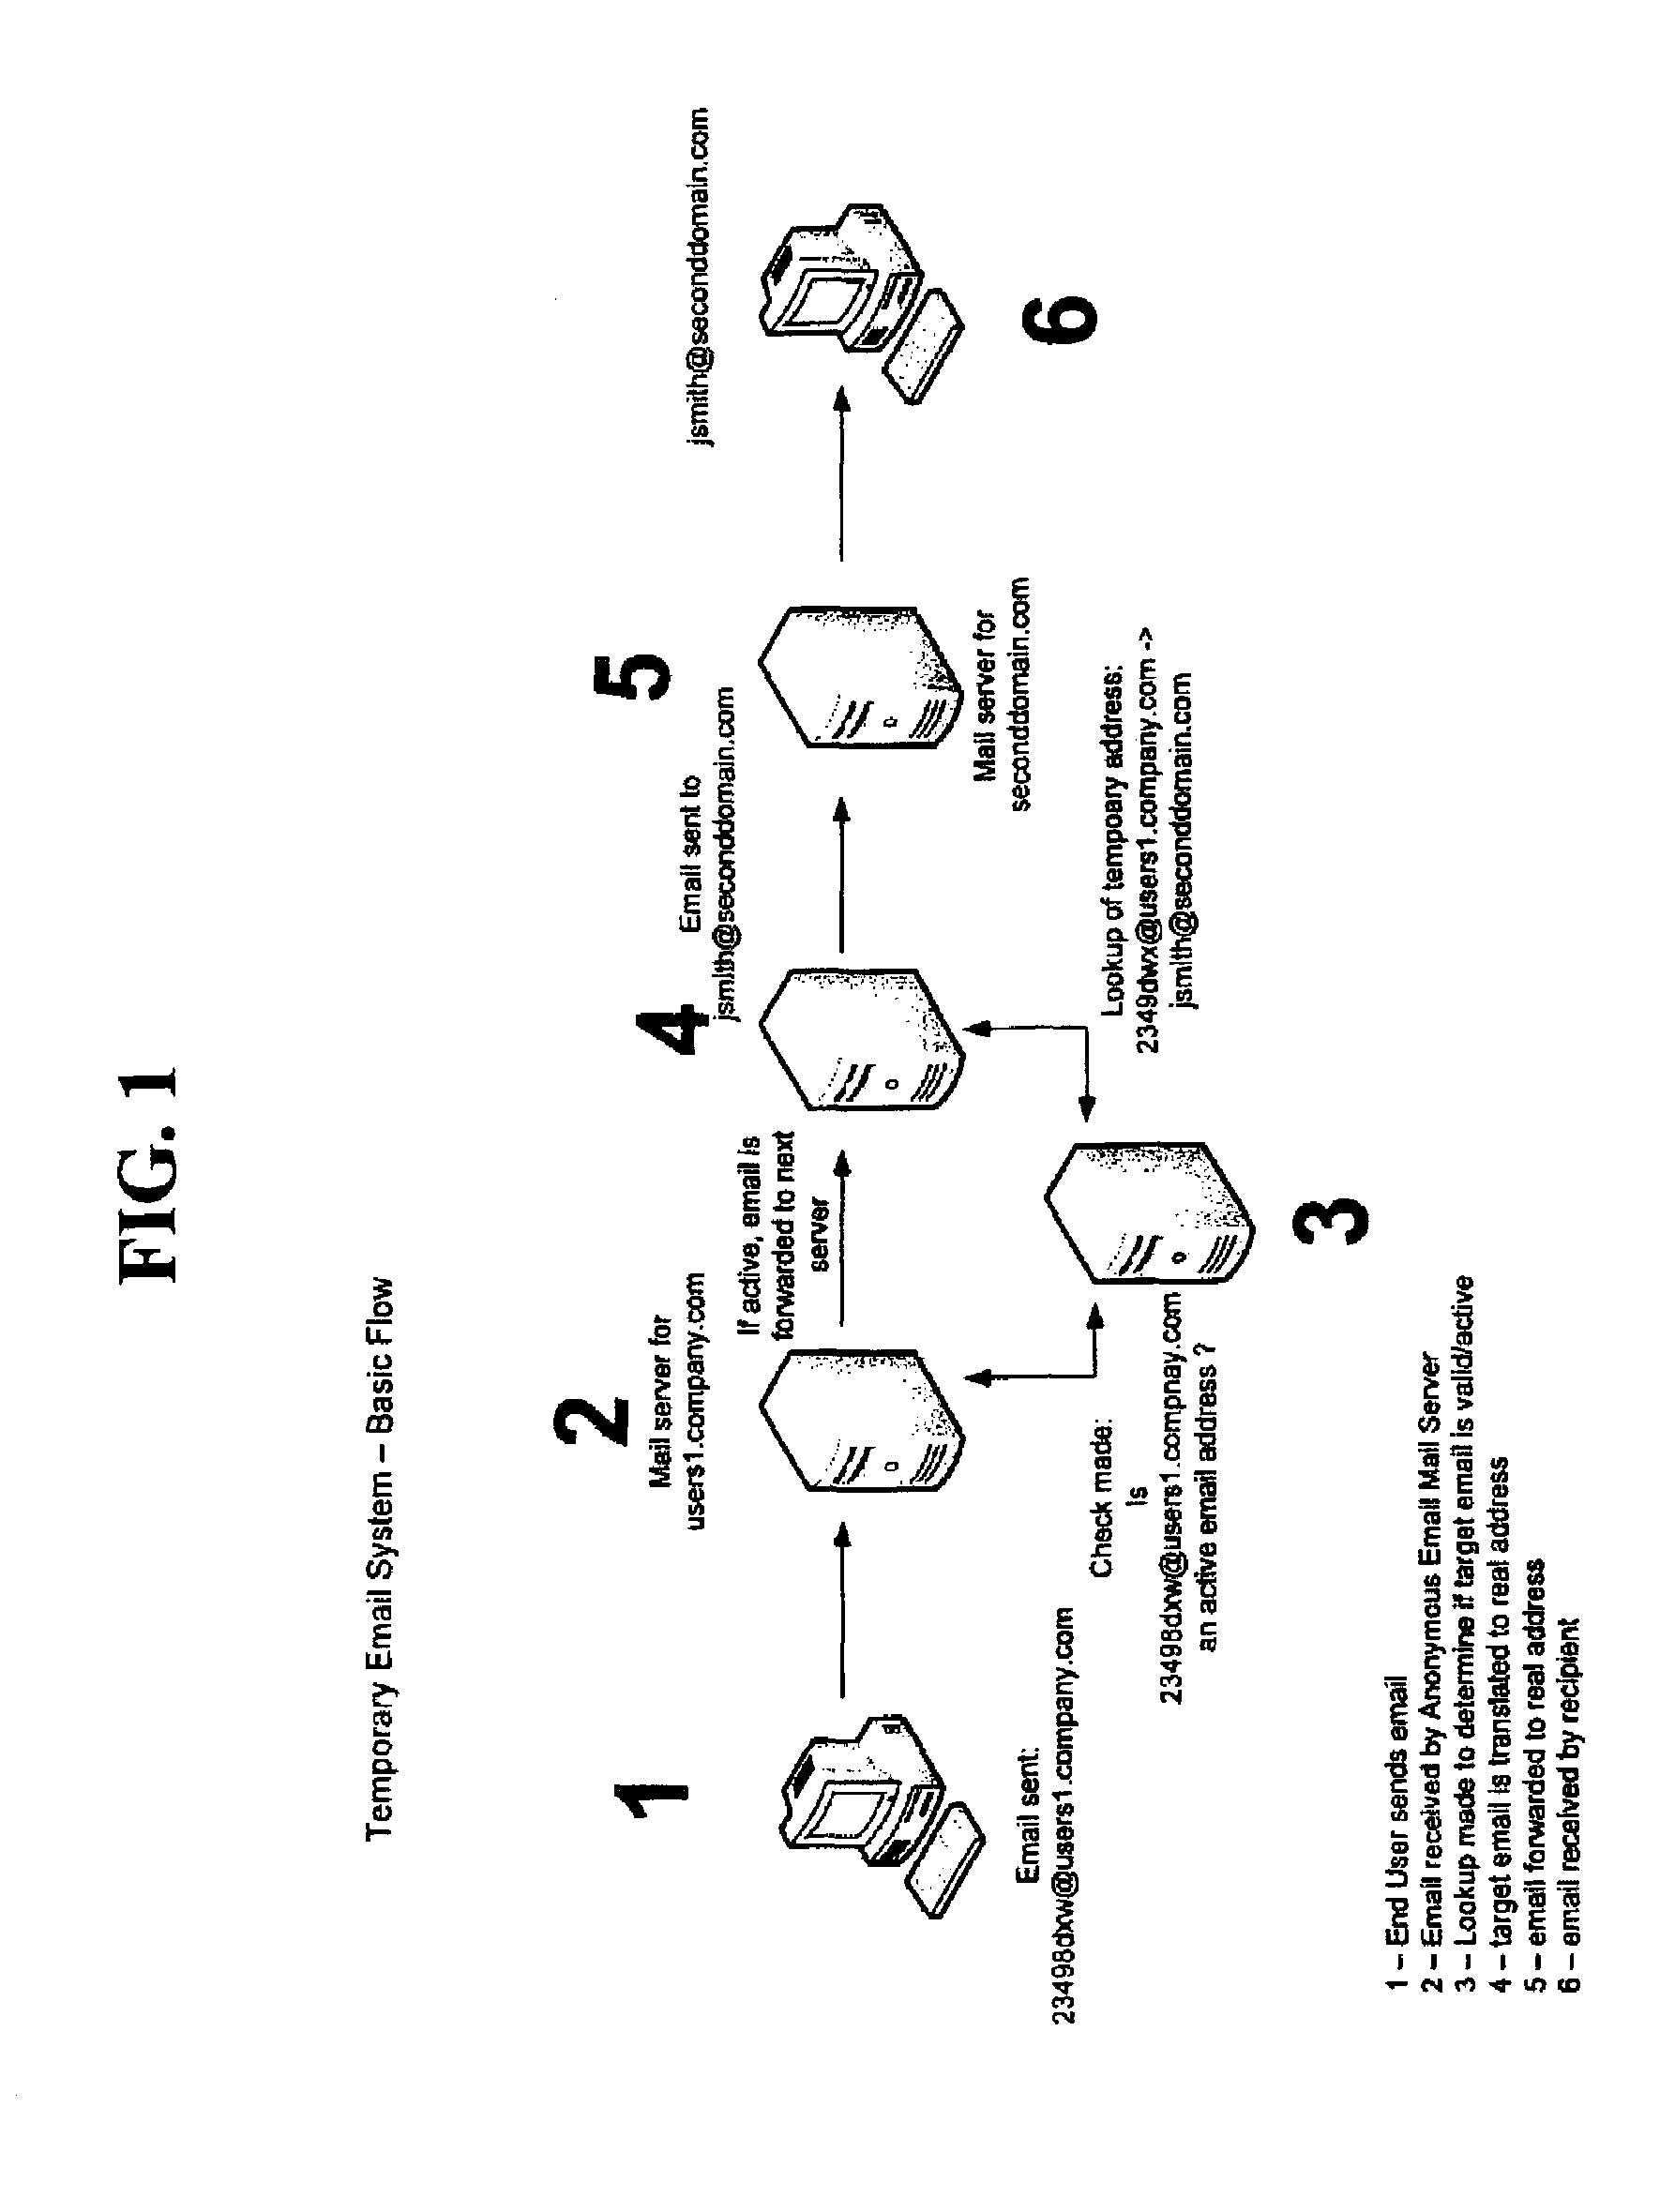 Method for reducing the receipt of unsolicited bulk e-mail and providing anonymity to an email-user